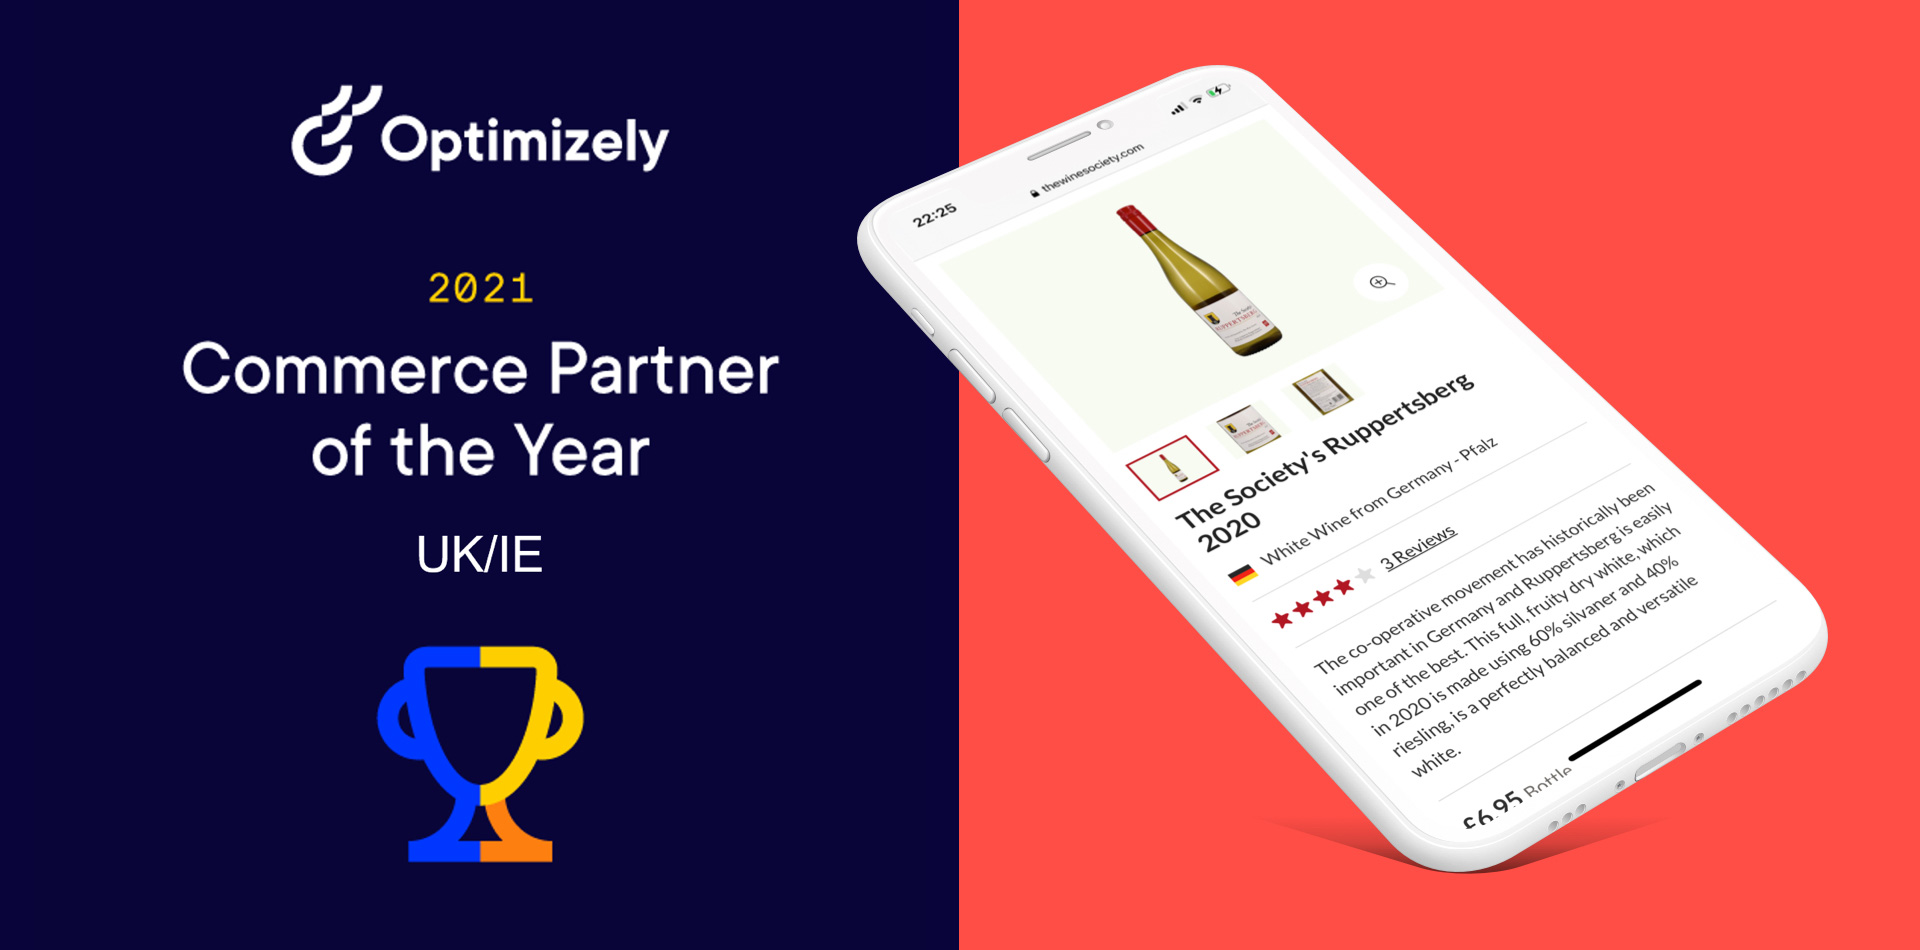 dotcentric - awarded Optimizely Commerce Partner of the Year in the UK/IE 